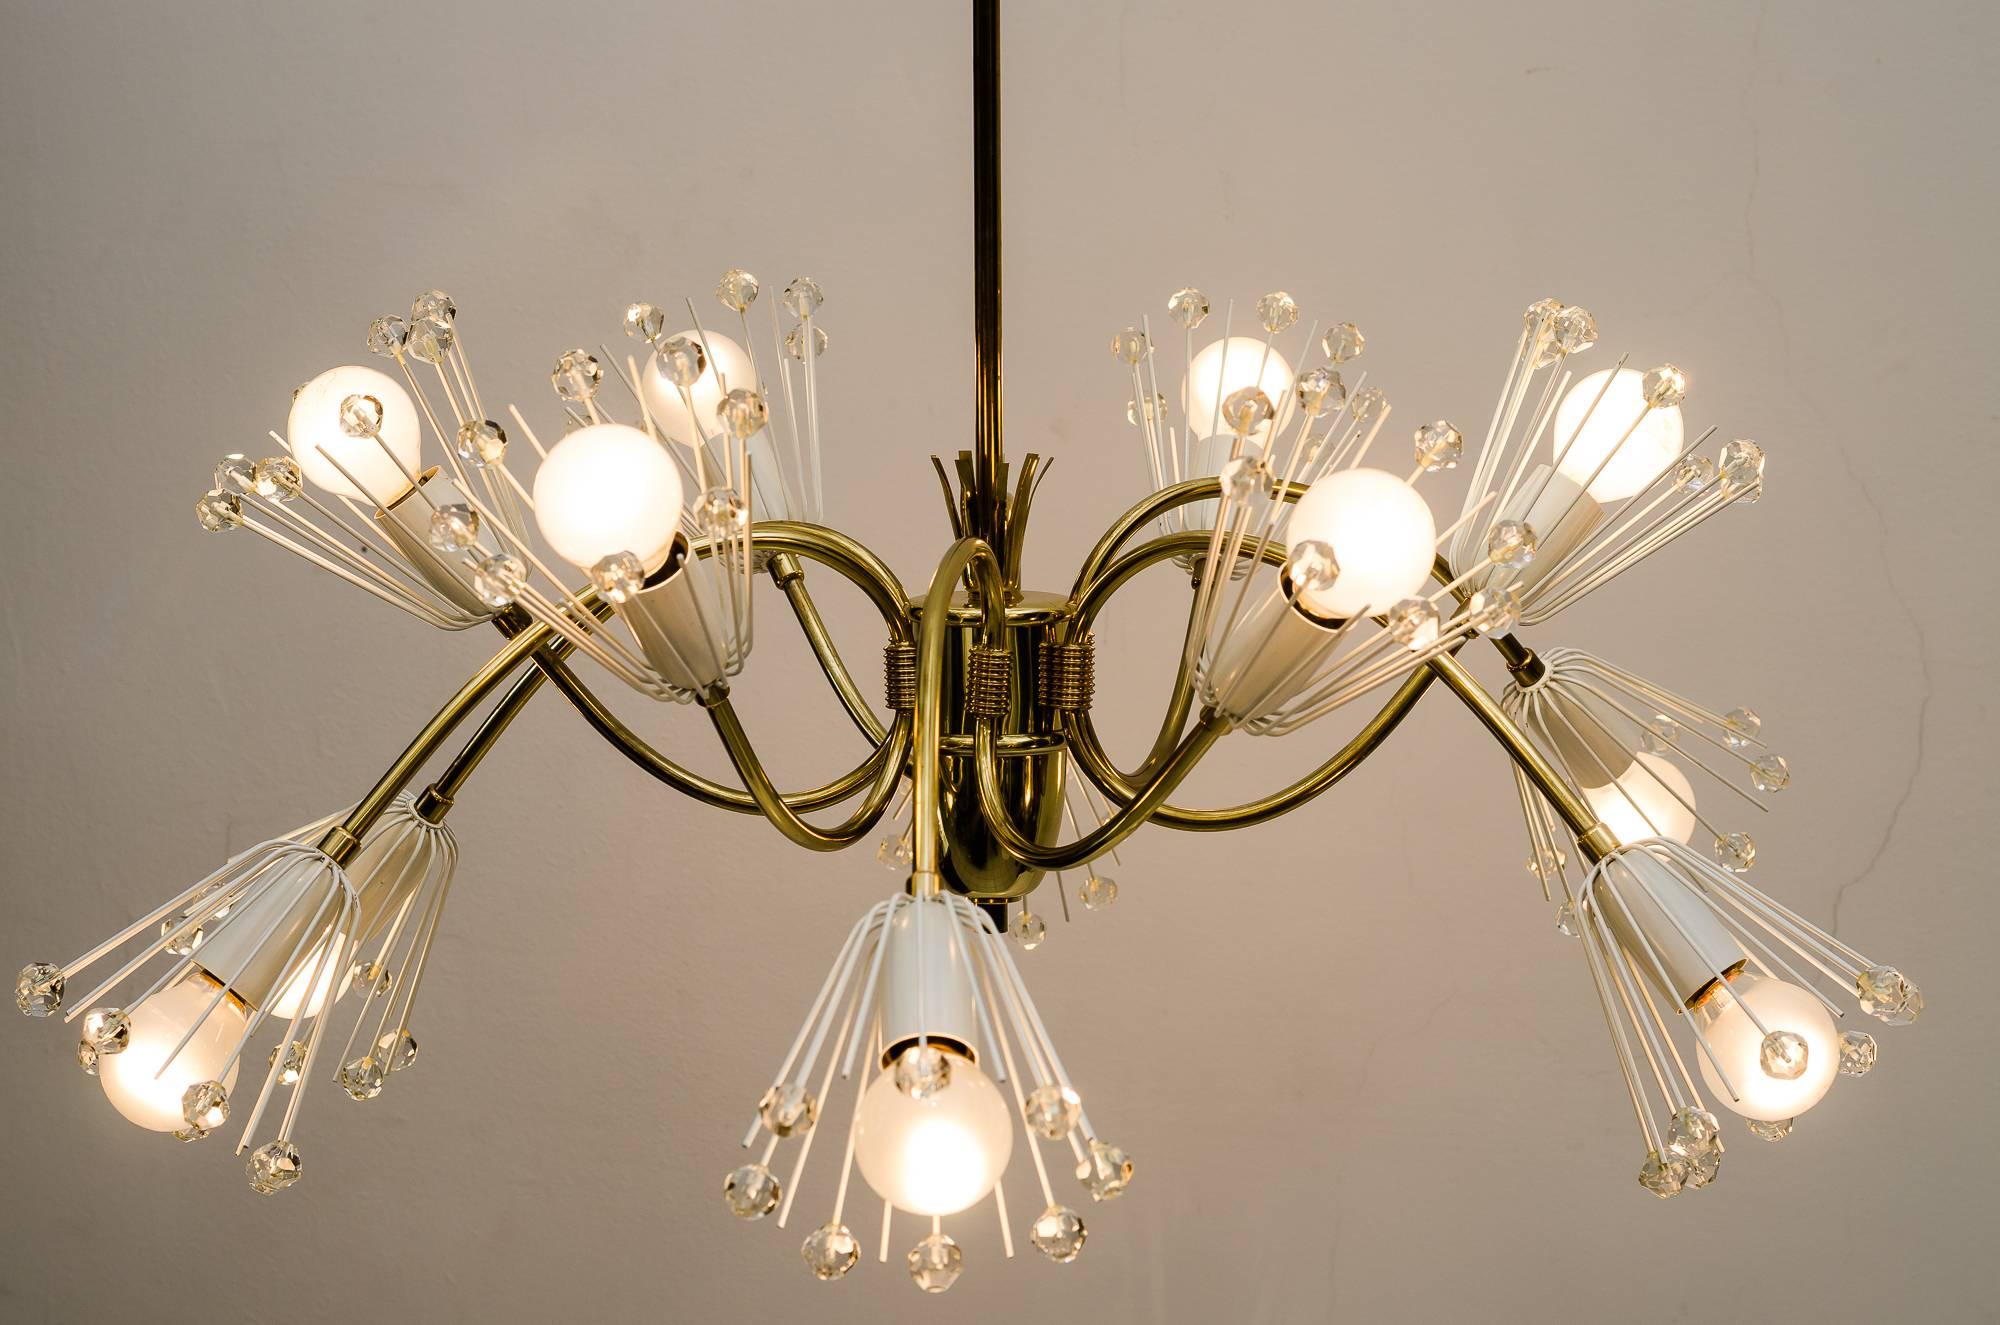 Beautiful chandelier by Emil Stejnar for Rupert Nikoll
Original condition
( 12 arms ).
  